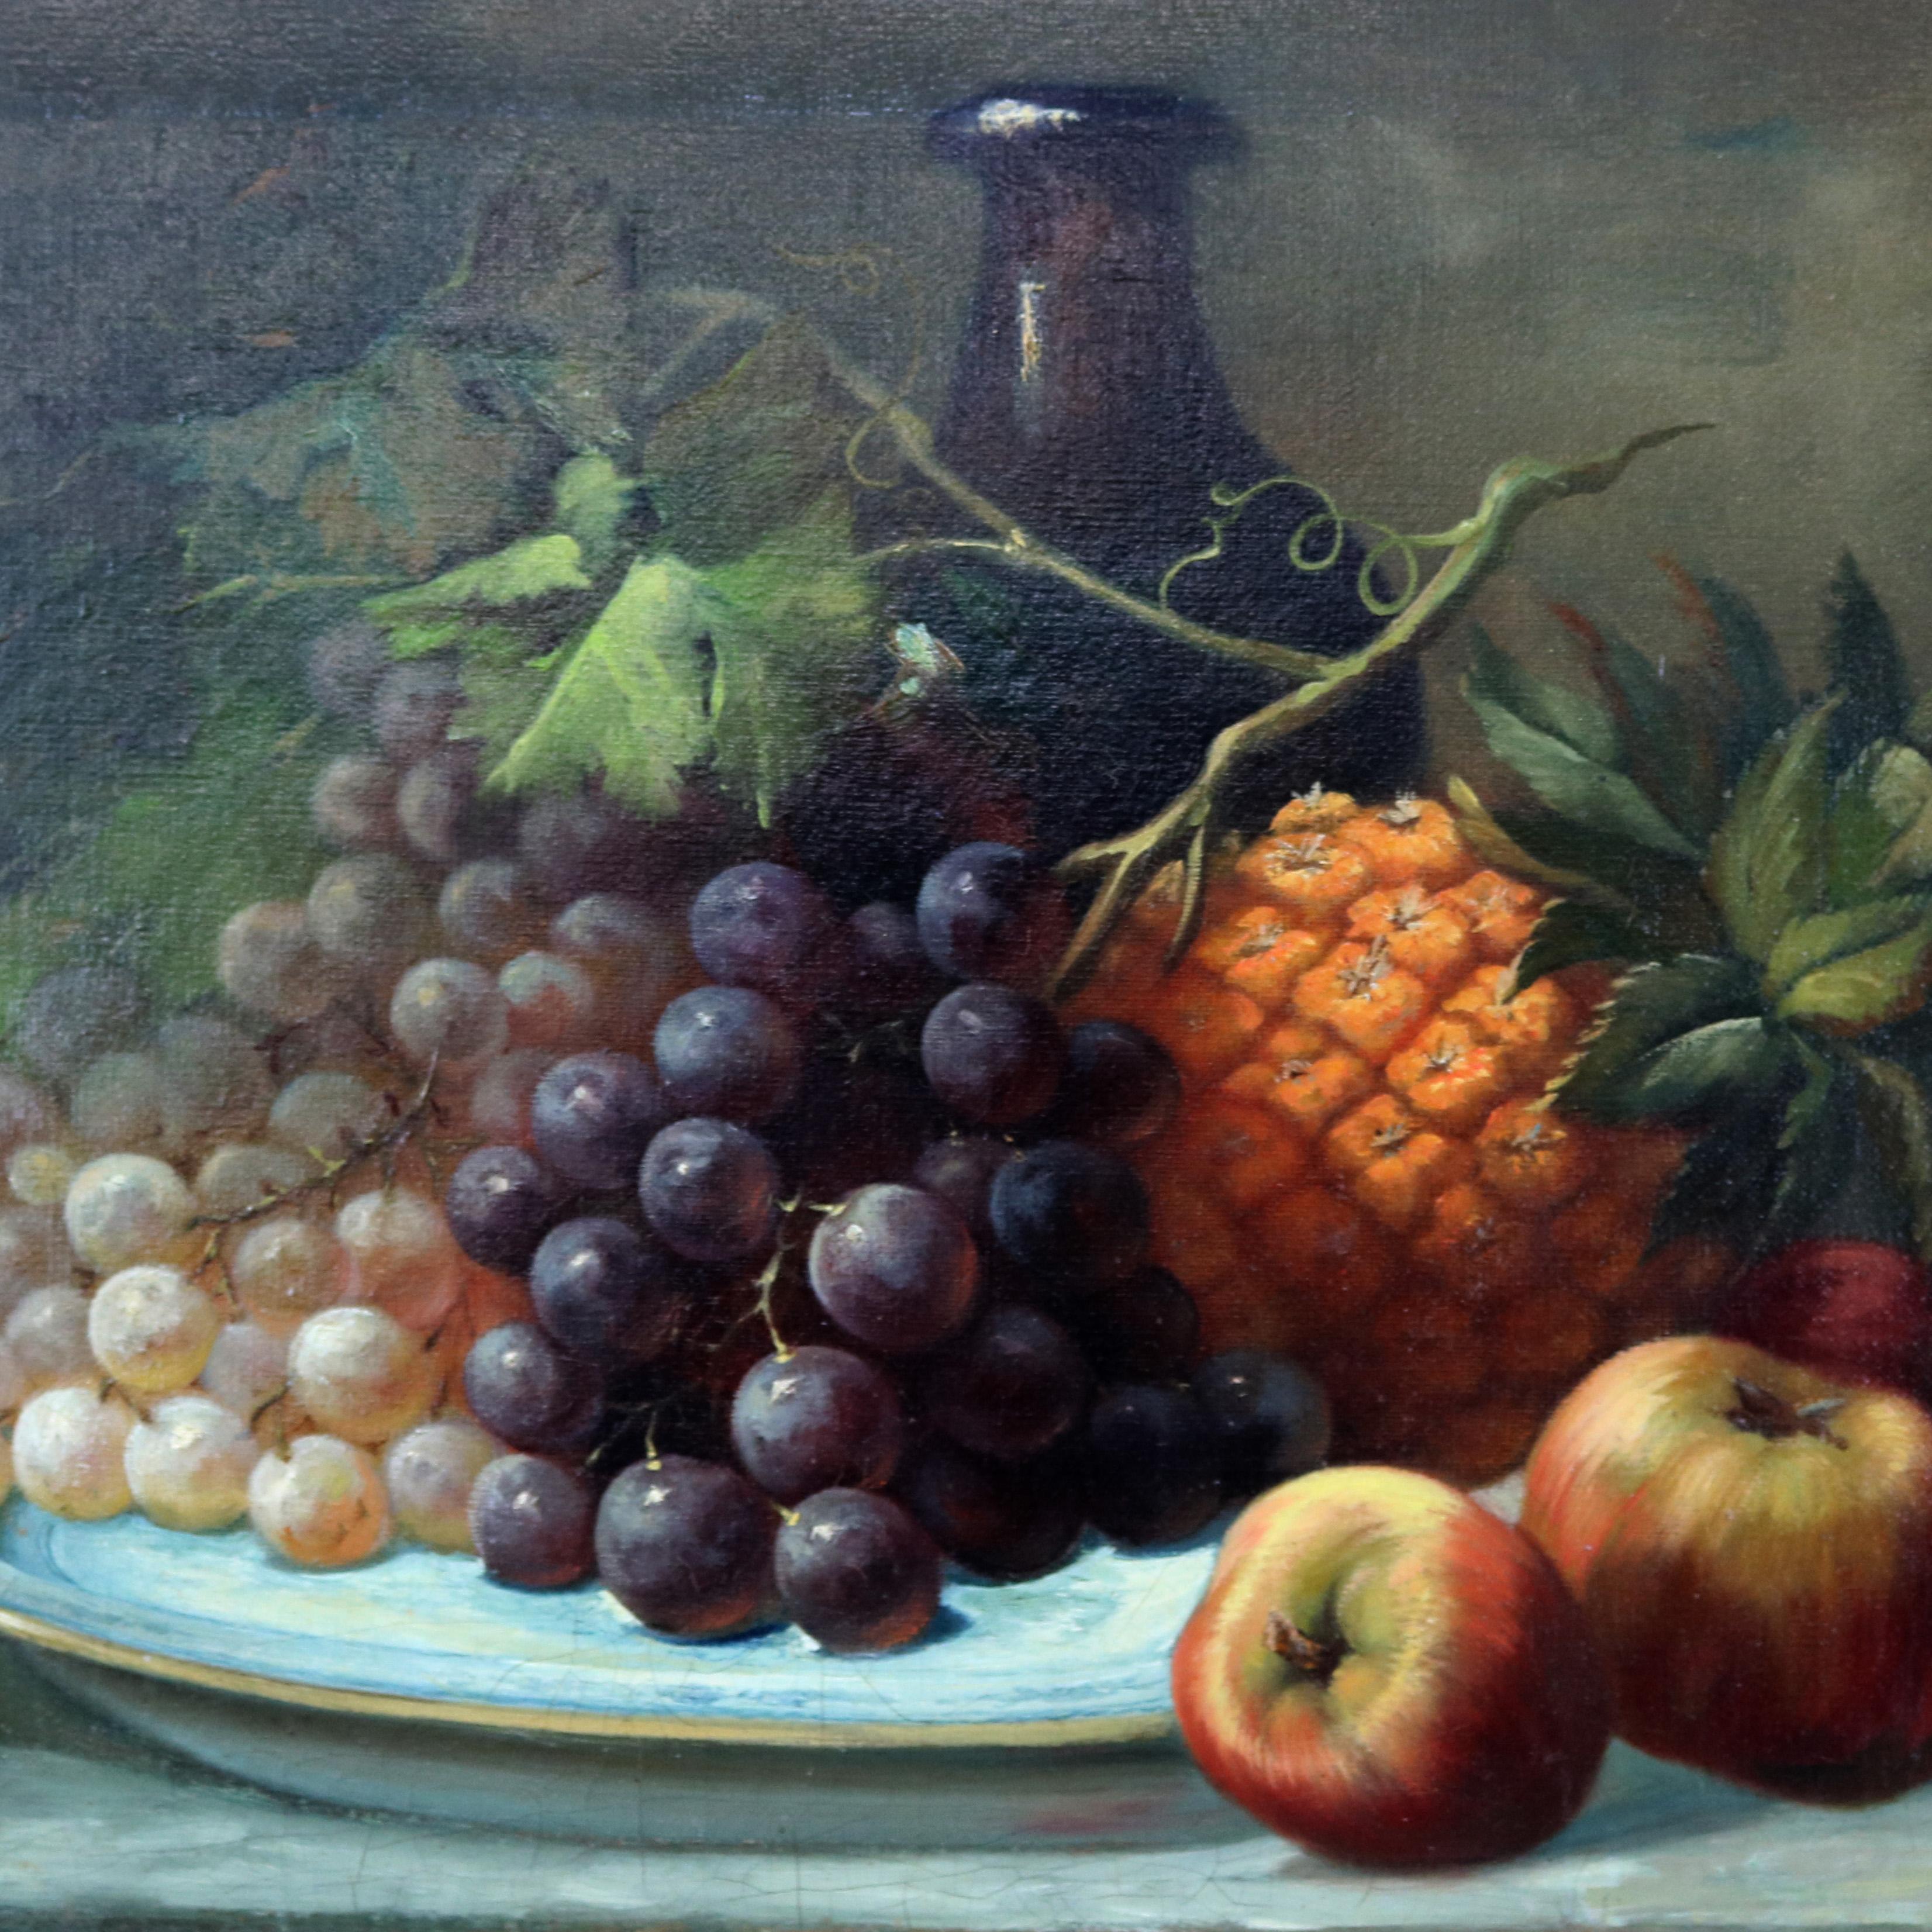 An antique Italian oil on canvas painting depicts fruit and bottle on table top artist signed, antique still life oil on canvas painting, artist signed lower right, circa 1890

Measures: 20.75